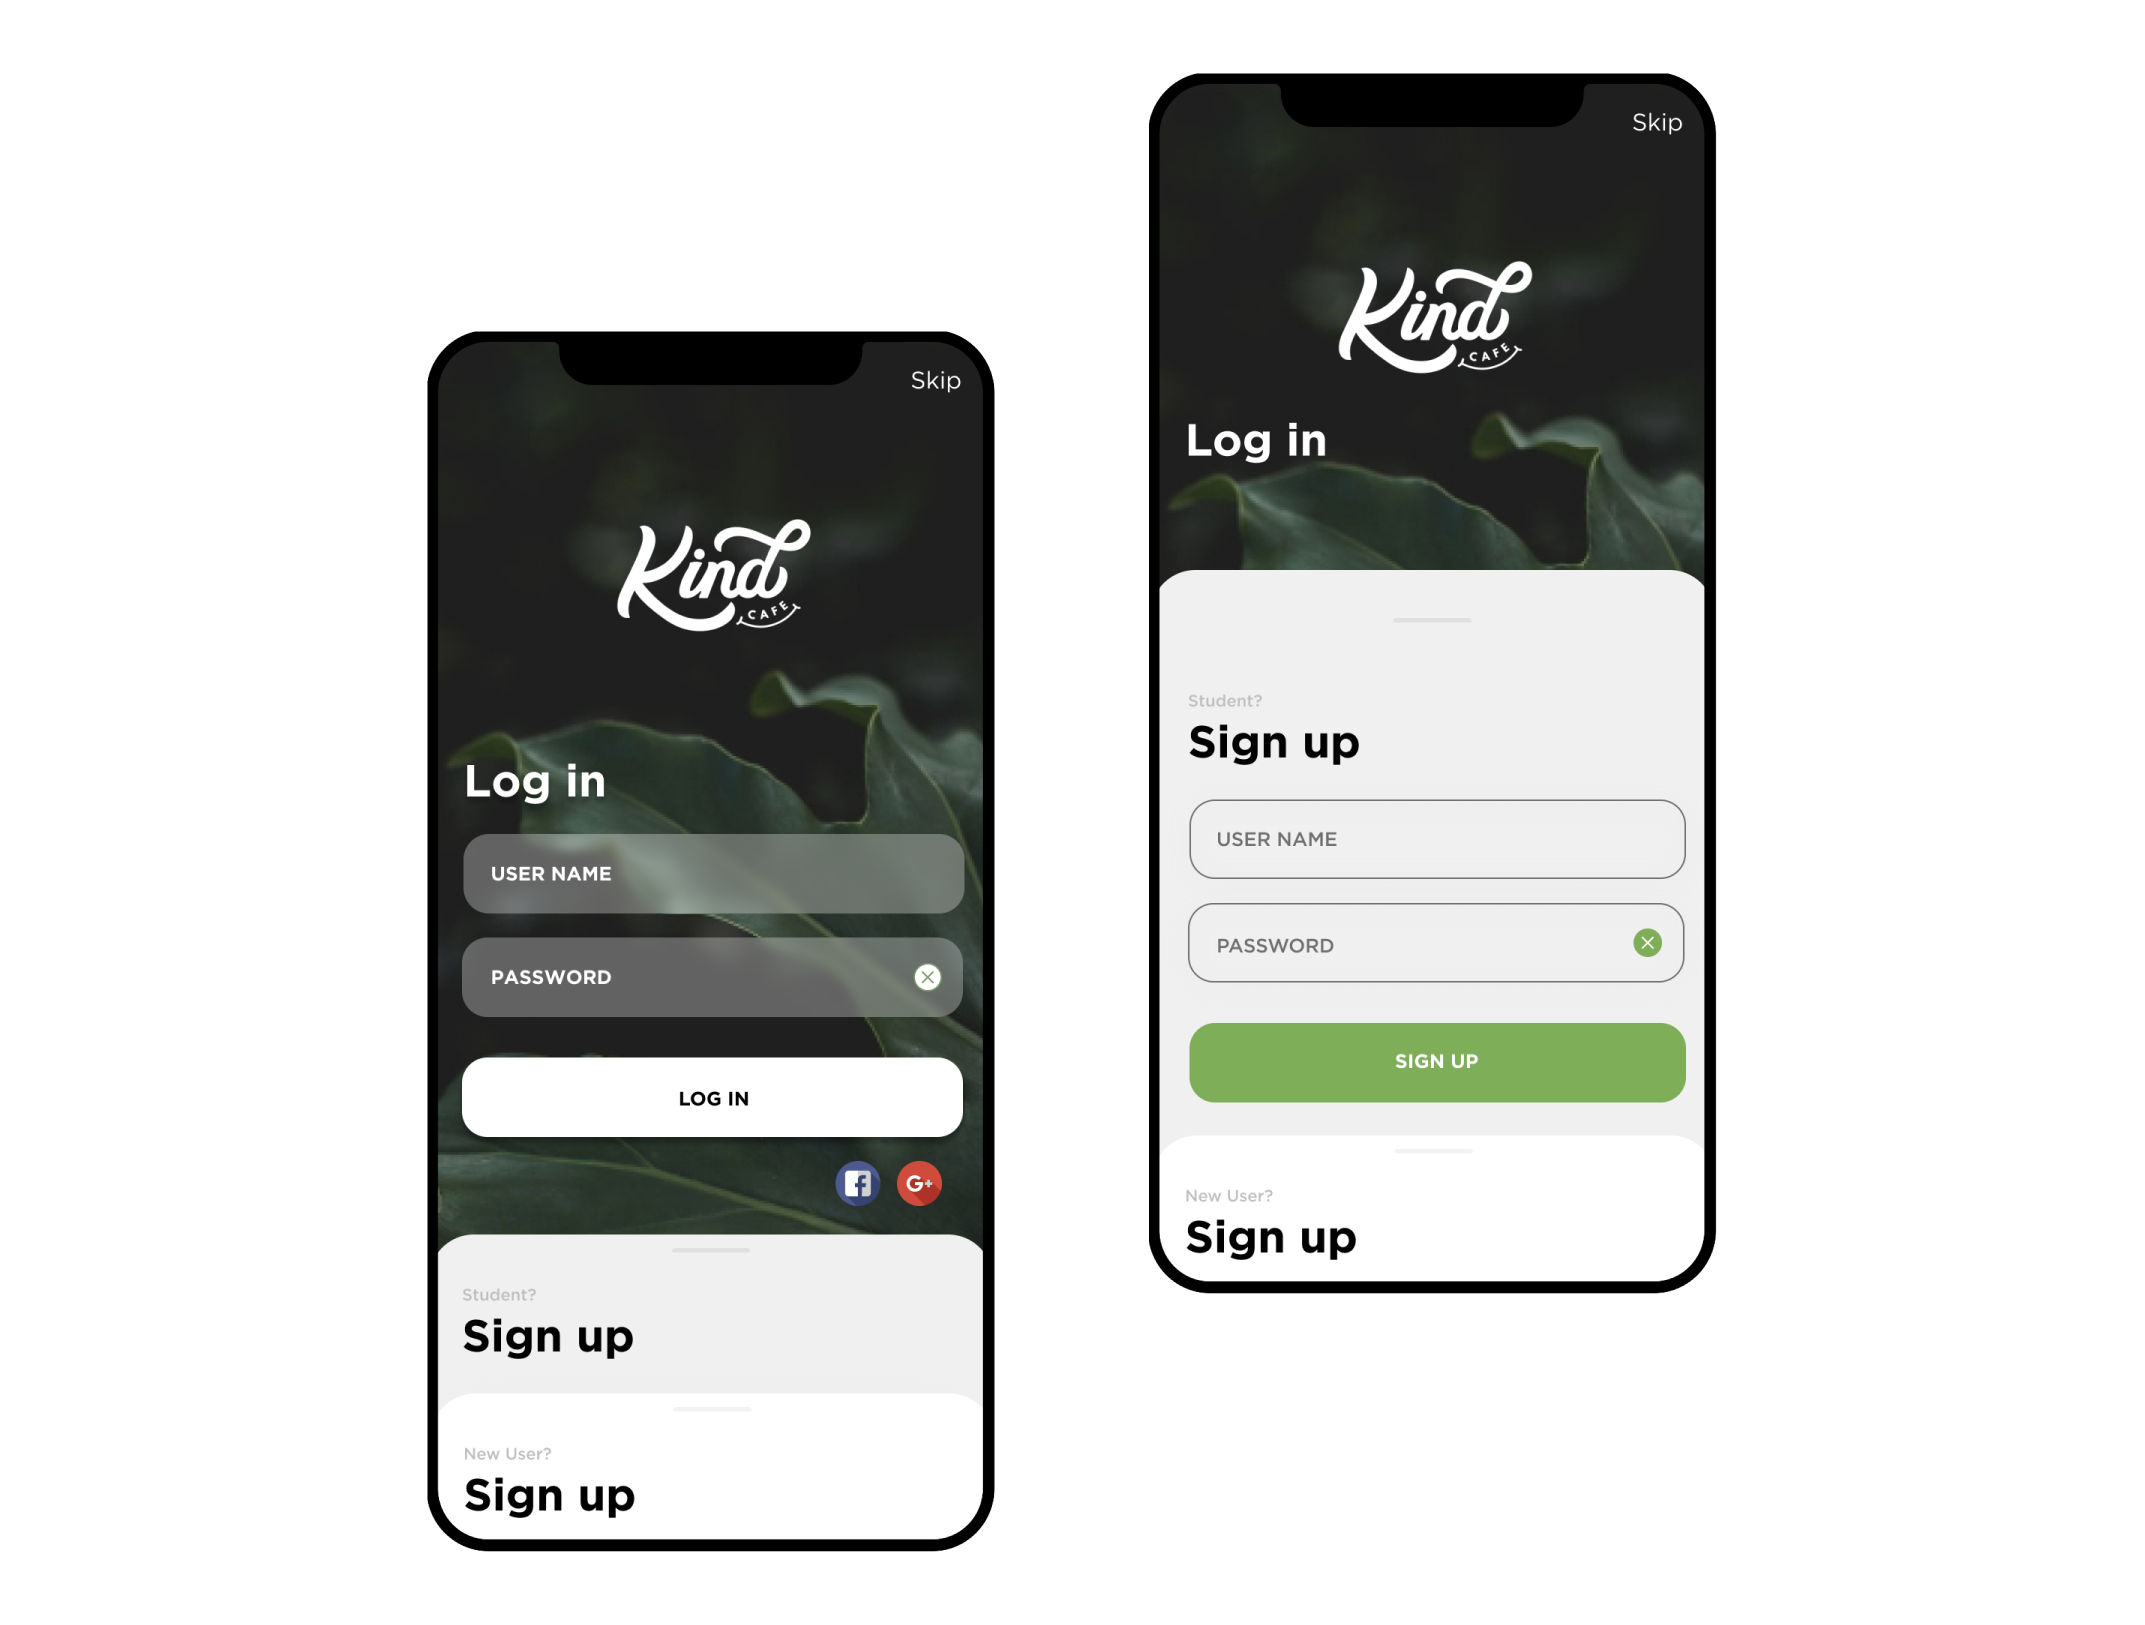 Login and sign-up options